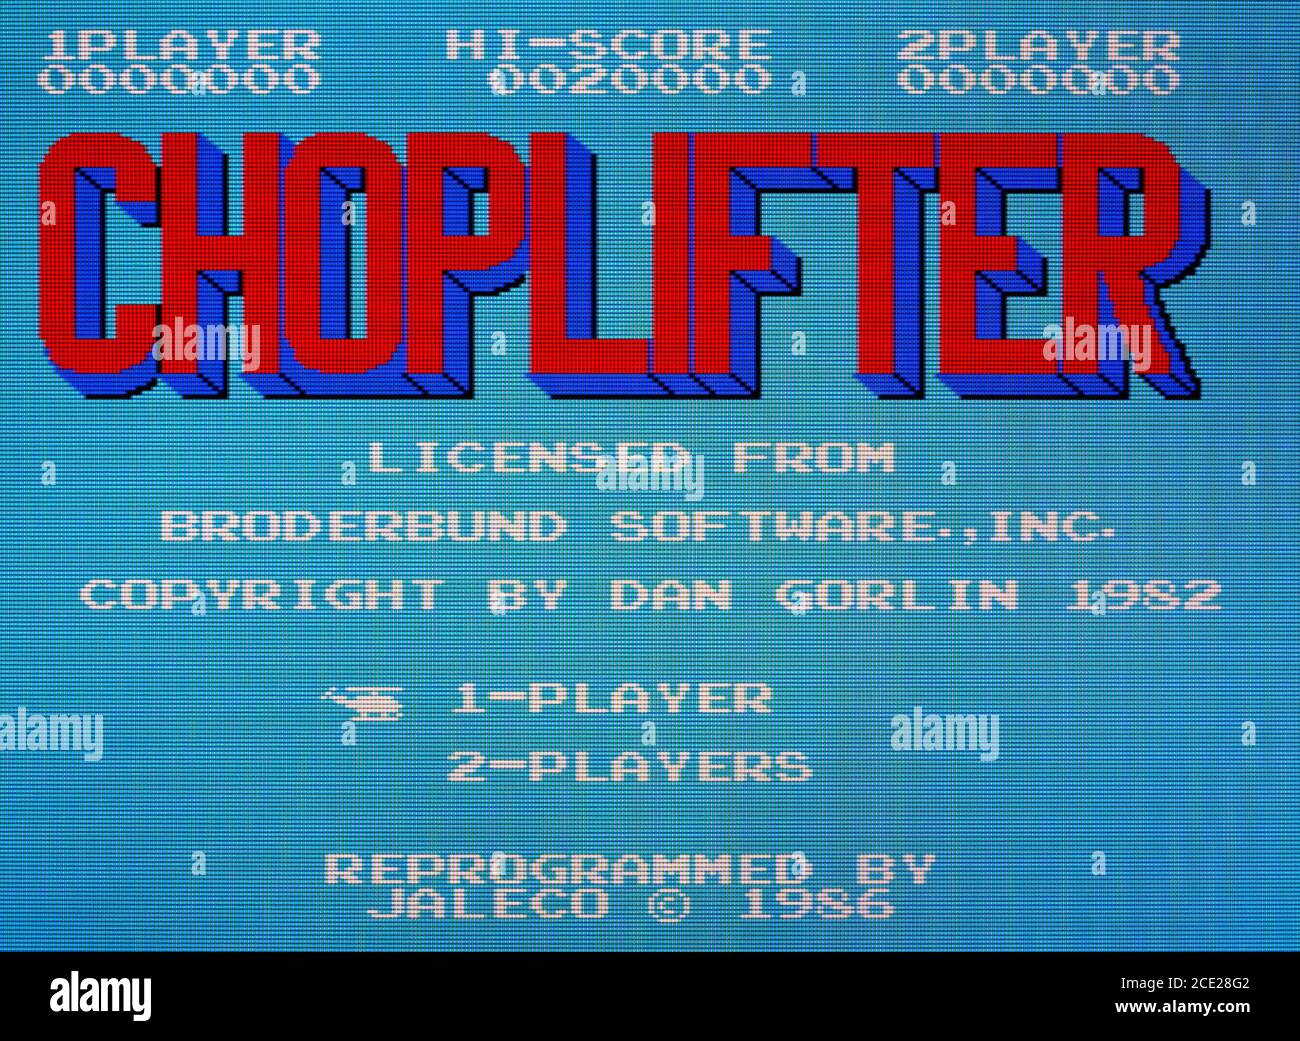 Choplifter - Nintendo Entertainment System - NES Videogame - Editorial use only Stock Photo